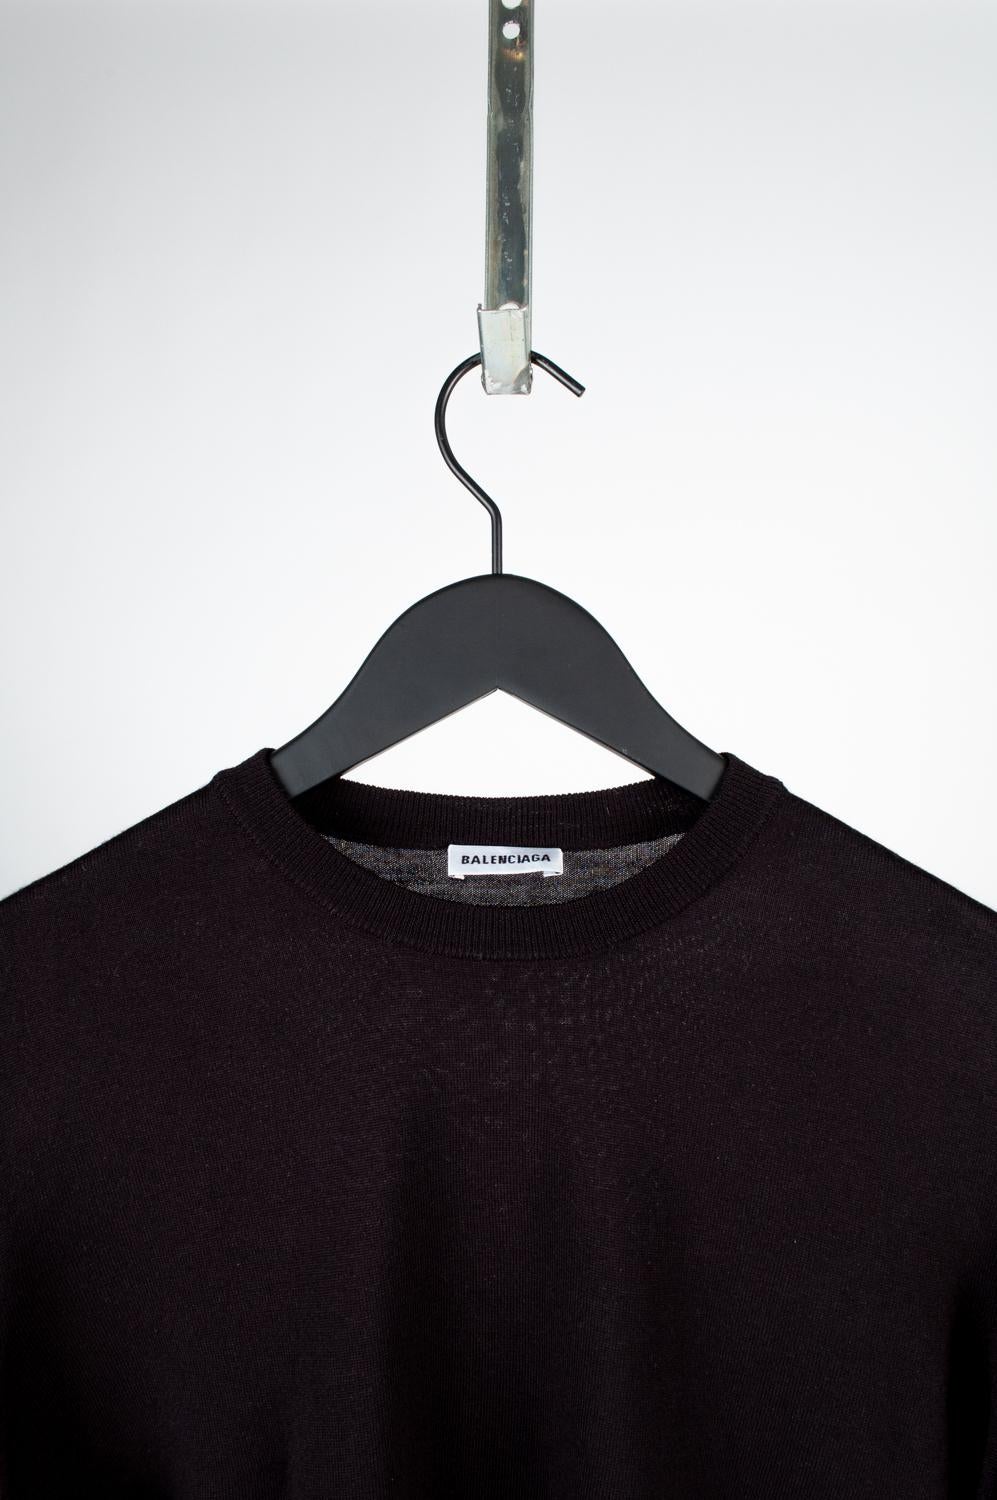 Balenciaga Men Sweater Top Crew Neck Size S/M, S598 In Excellent Condition For Sale In Kaunas, LT